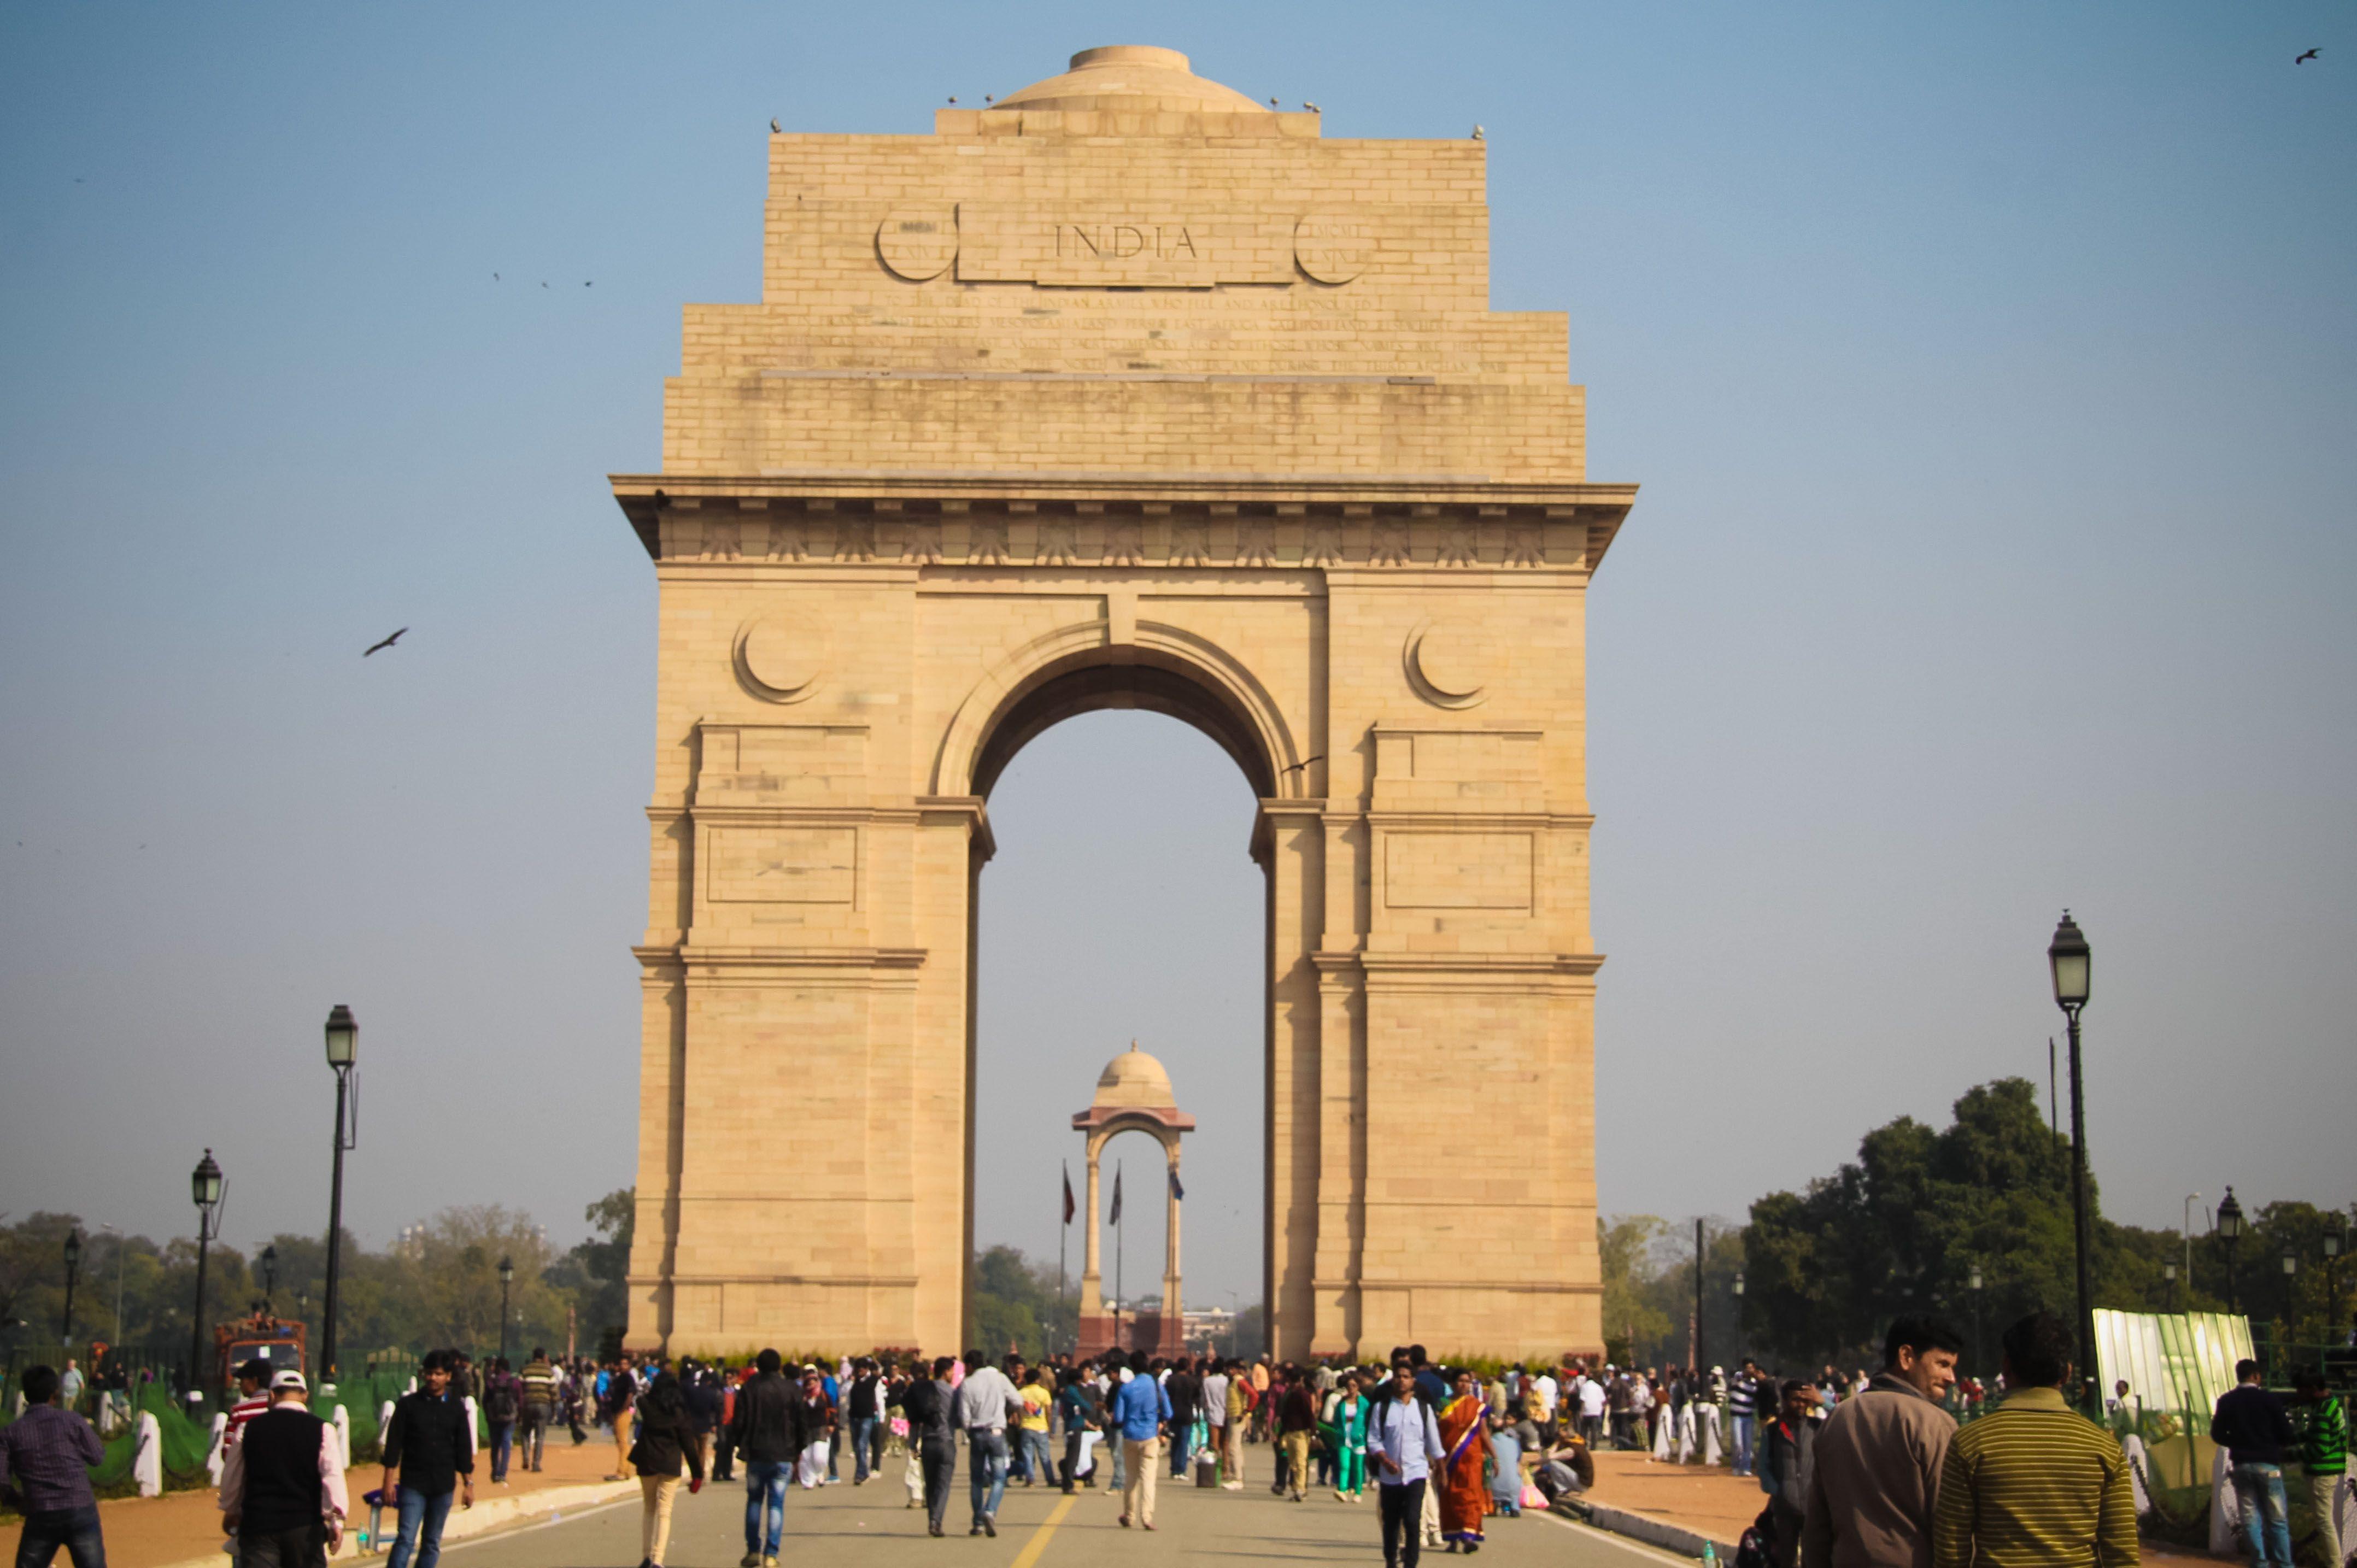 India Gate Wallpapers - Wallpaper Cave